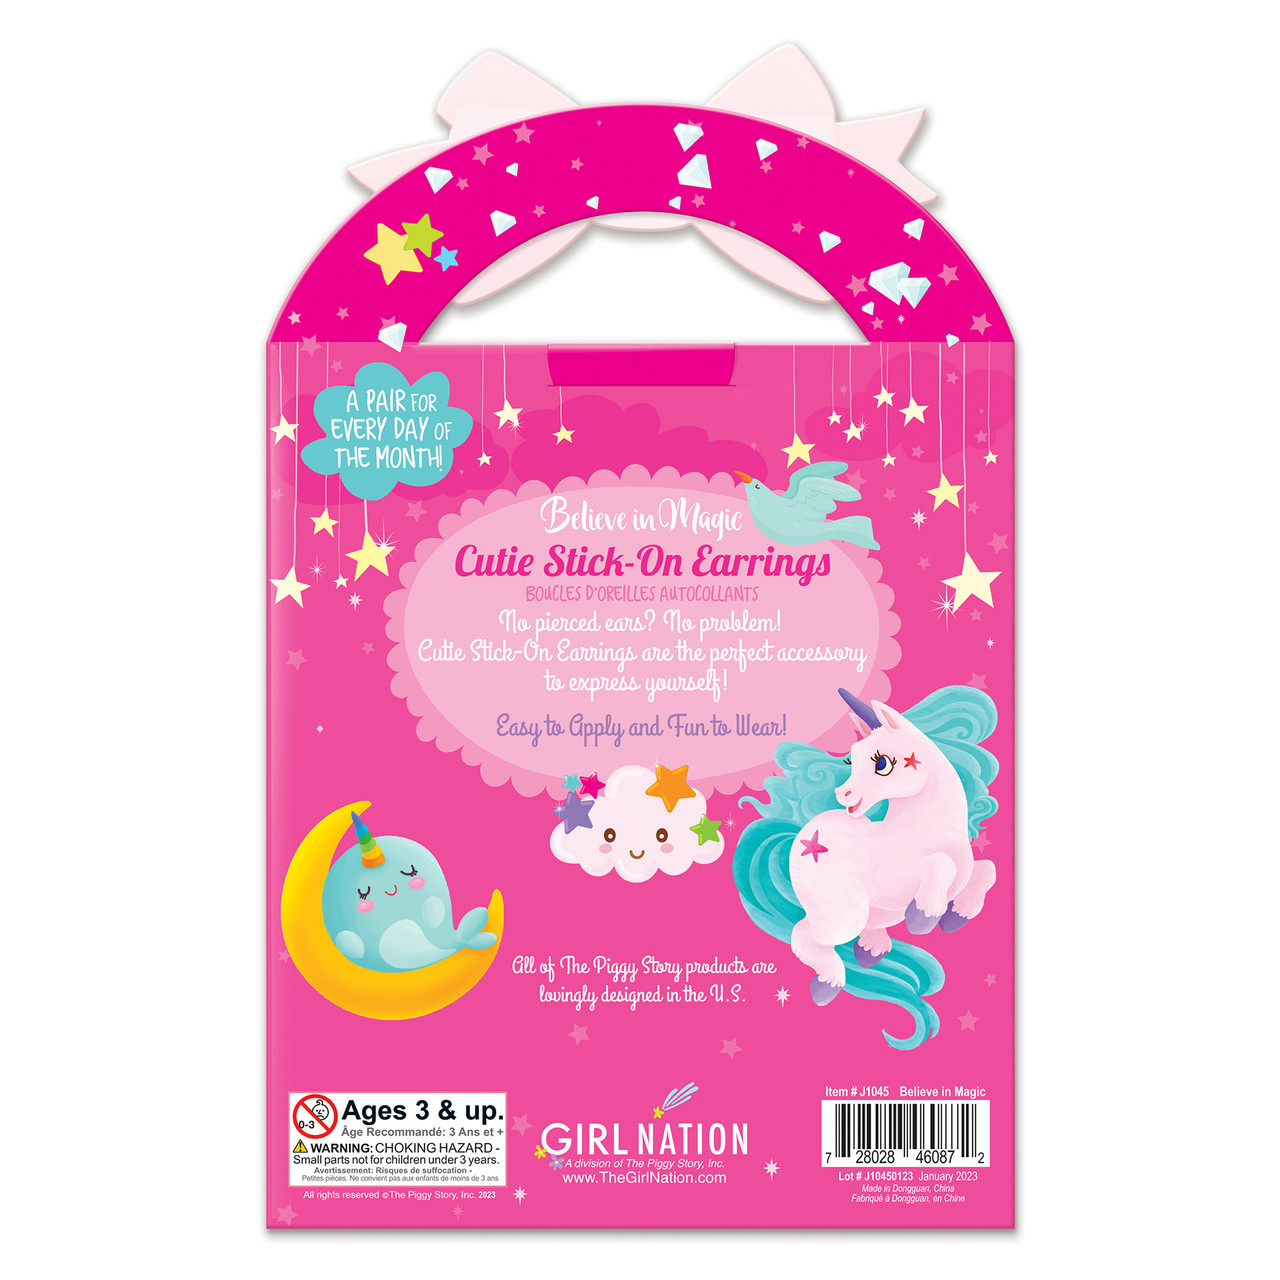 Cutie Stick-On Earring and Nail Sticker Gift Set- Animals